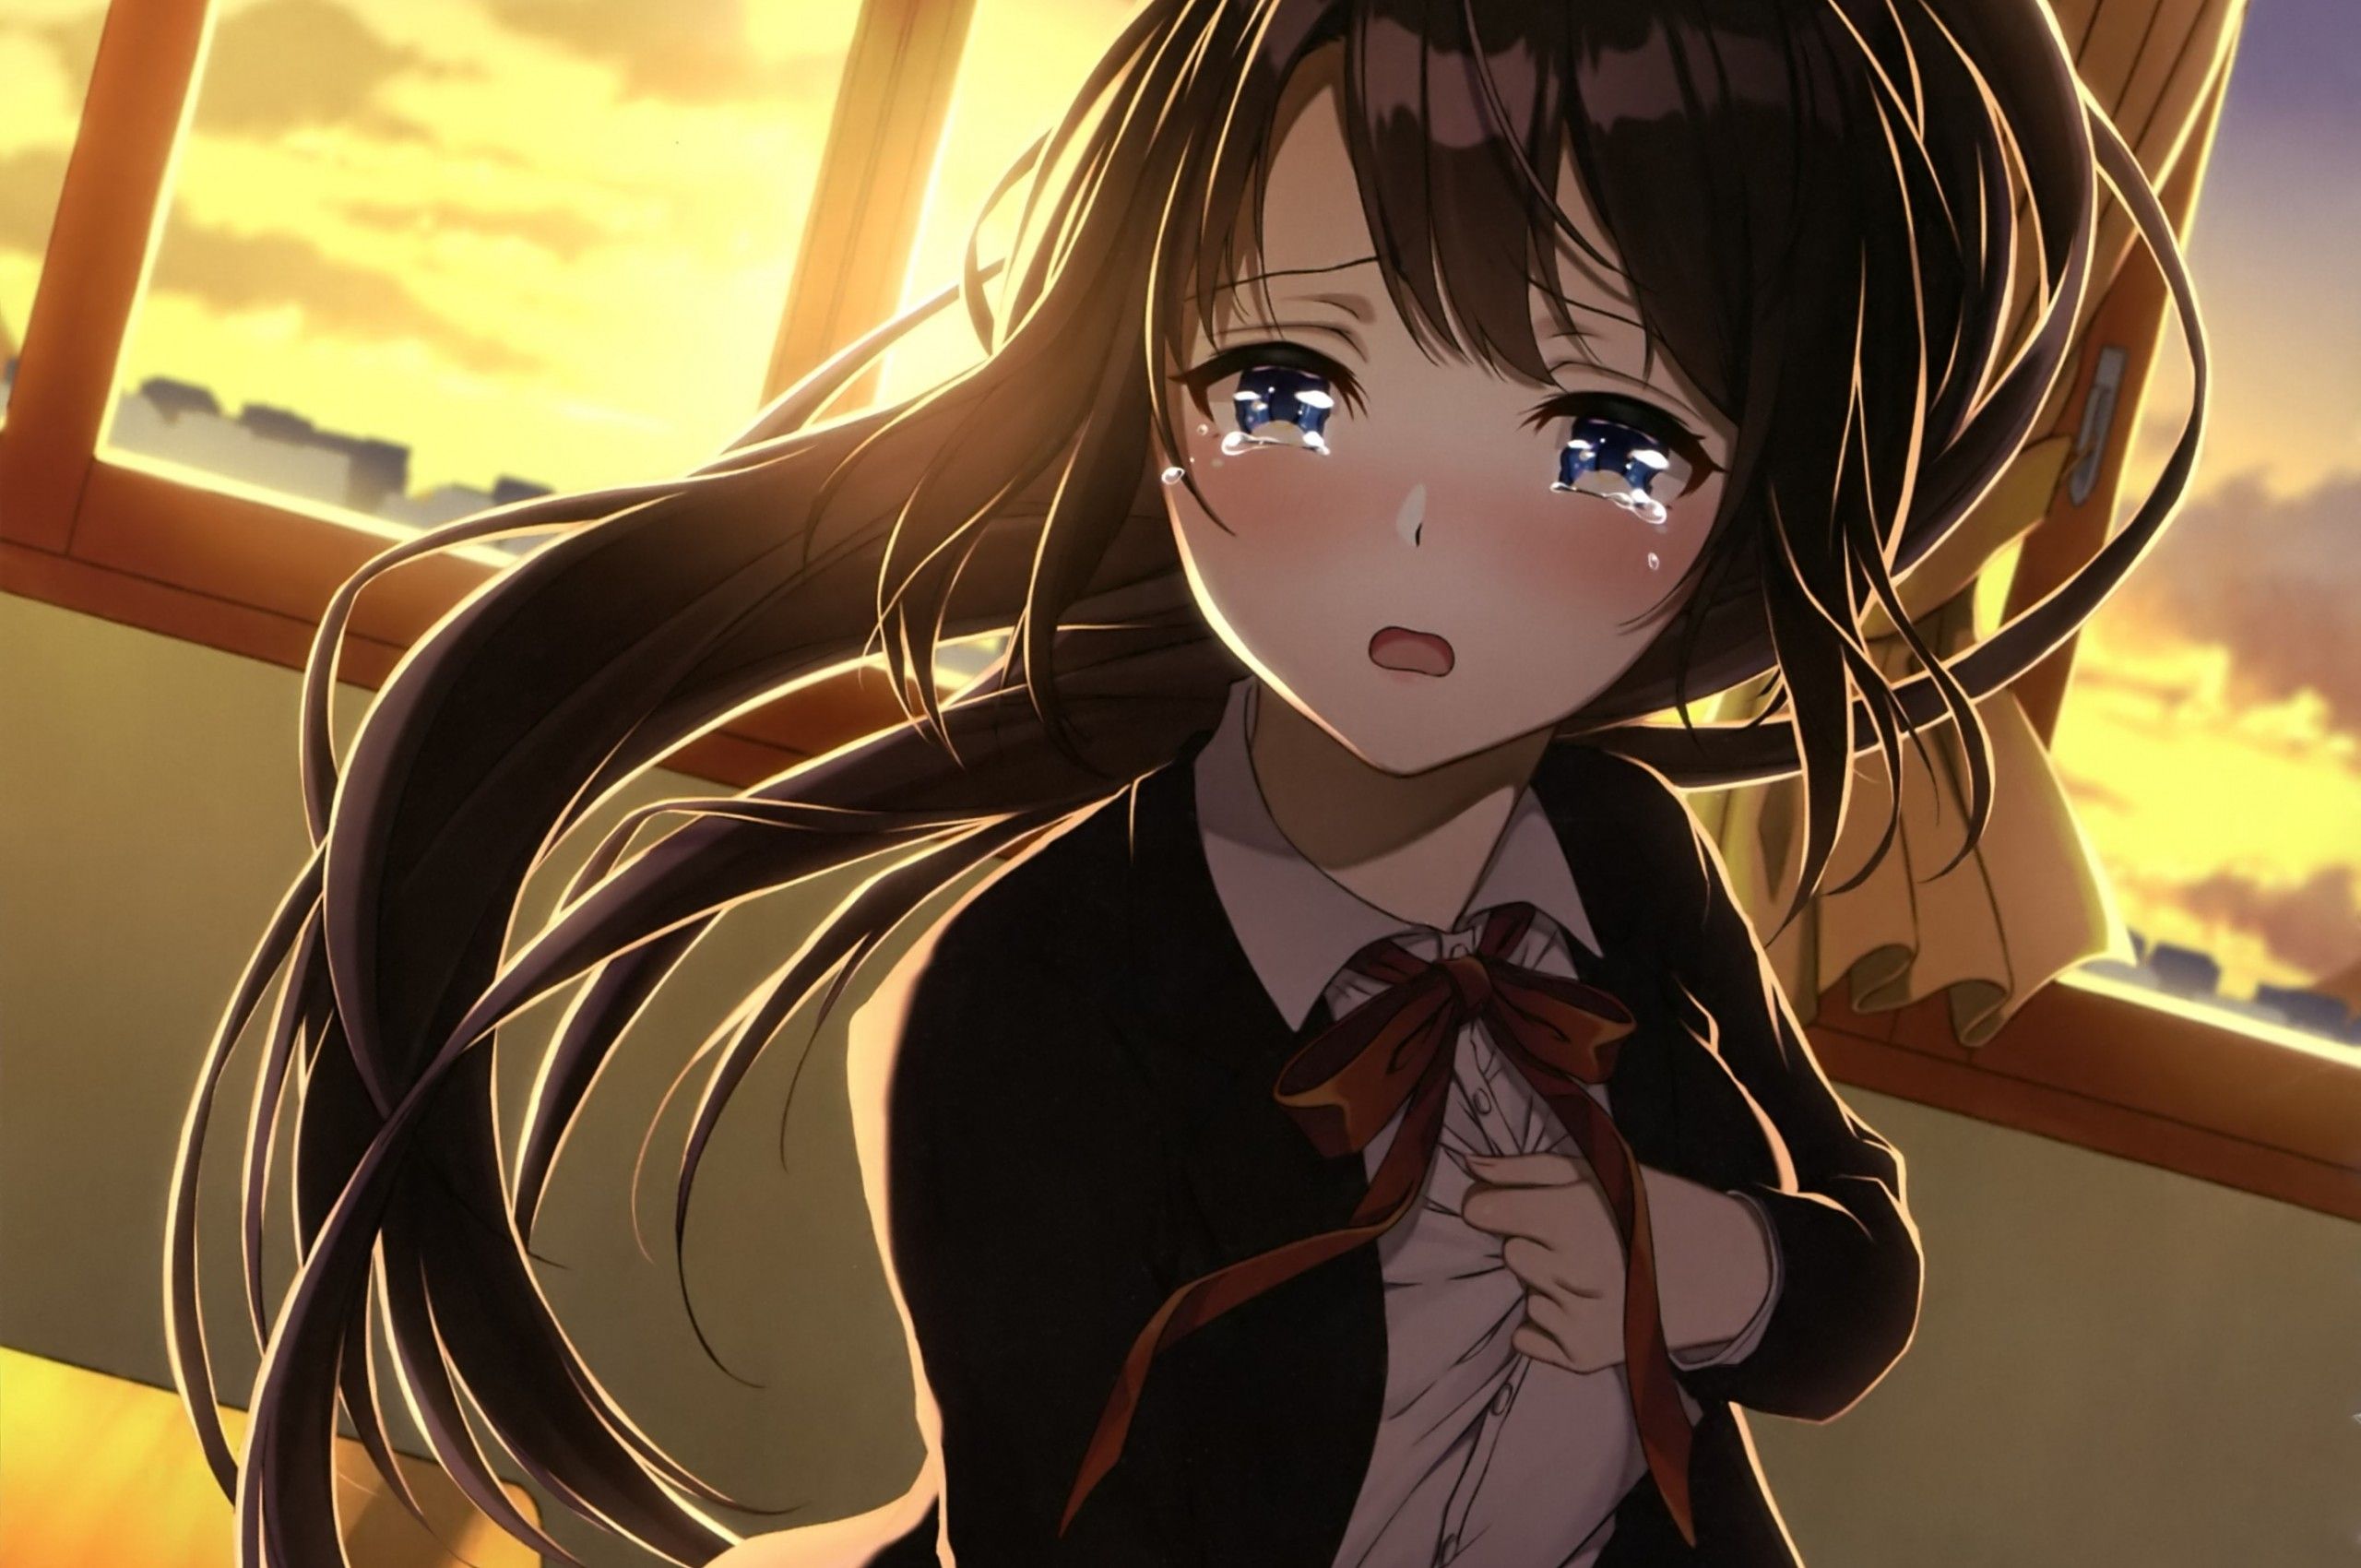 Download 2560x1700 Anime Girl, Crying, Classroom, Sad Face, Brown Hair, School Uniform, Sunset Wallpaper for Chromebook Pixel